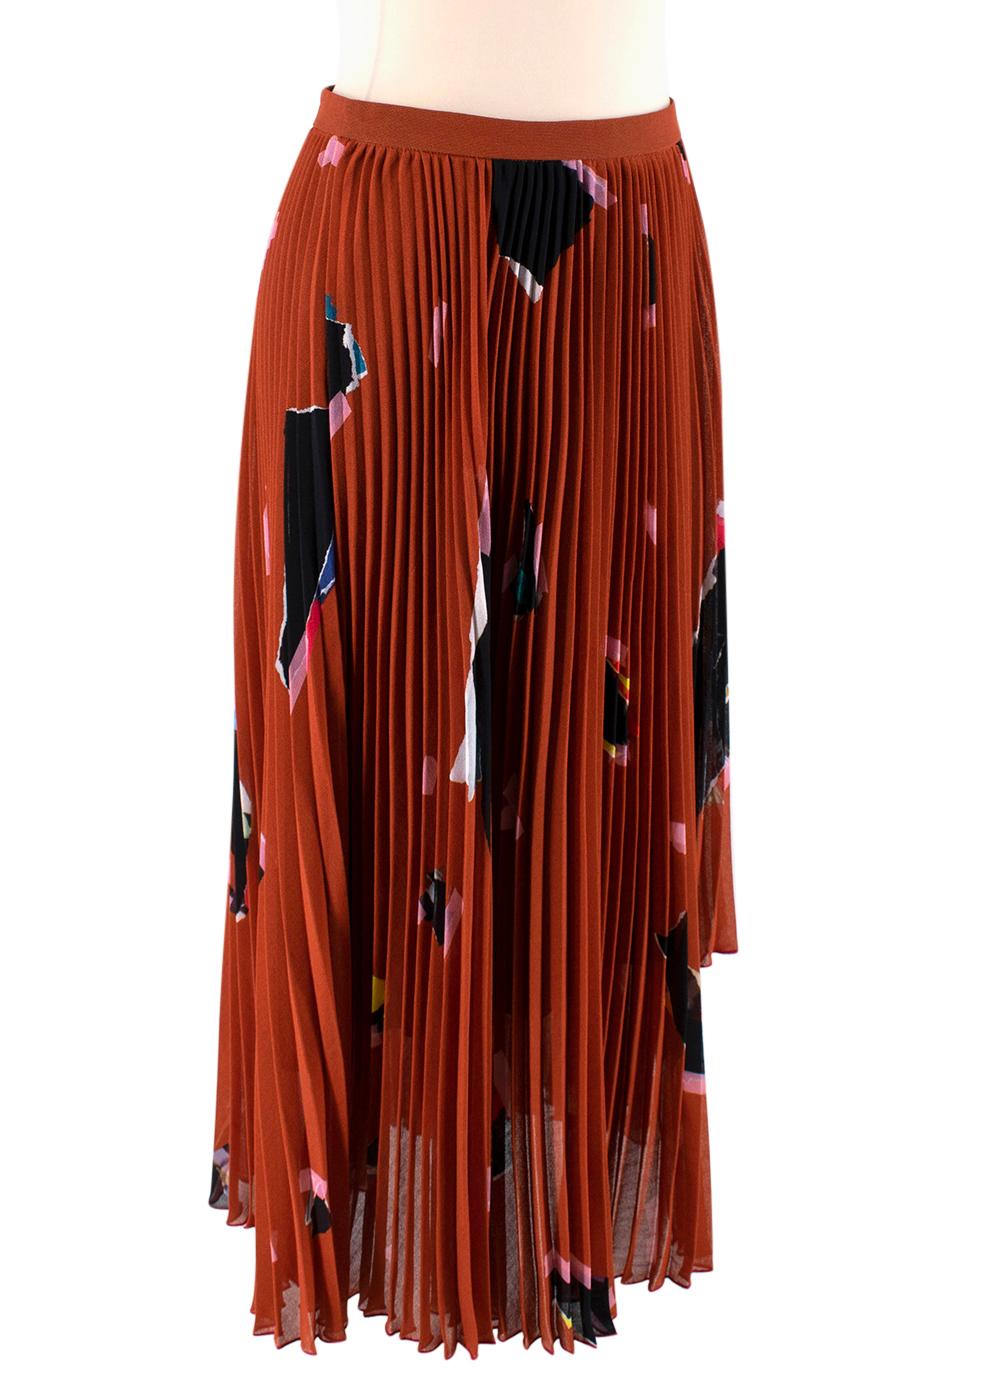 Proenza Schouler Rust Graphic Print Pleated Skirt

- Soft pleated fabric 
- Gorgeous graphic Print 
- Warm burnt orange hue 
- Zip fastening to side 
- Midi length 
- Elegant versatile design 

Materials:
100% polyester 

Dry clean only 

Made in